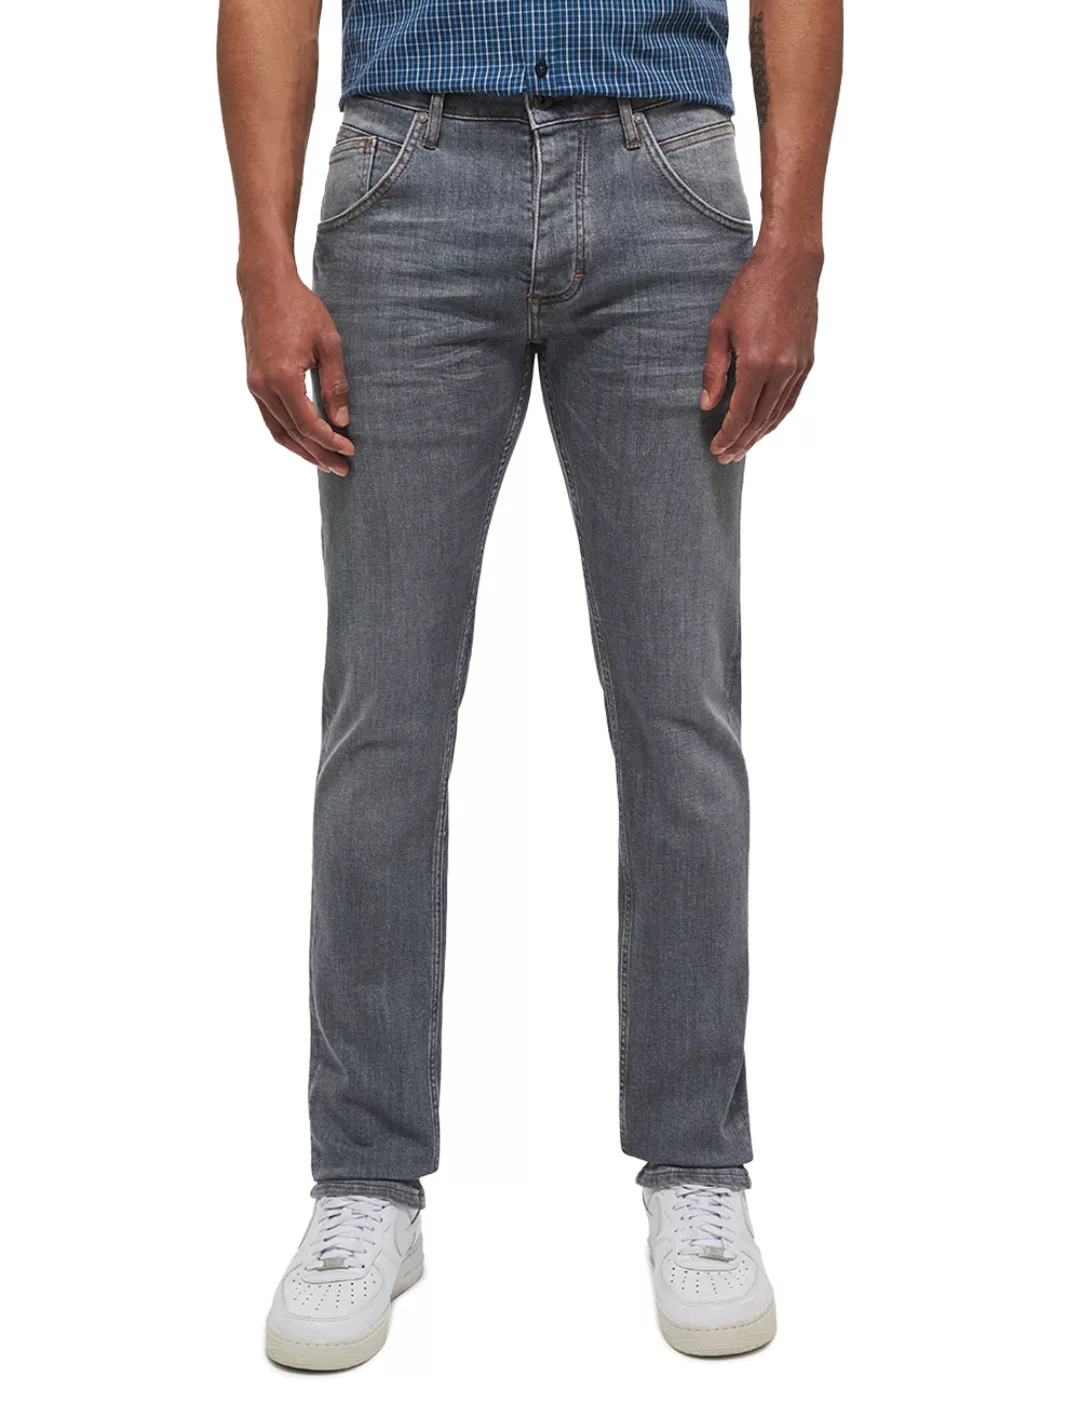 MUSTANG Tapered-fit-Jeans "Style Michigan Tapered" günstig online kaufen